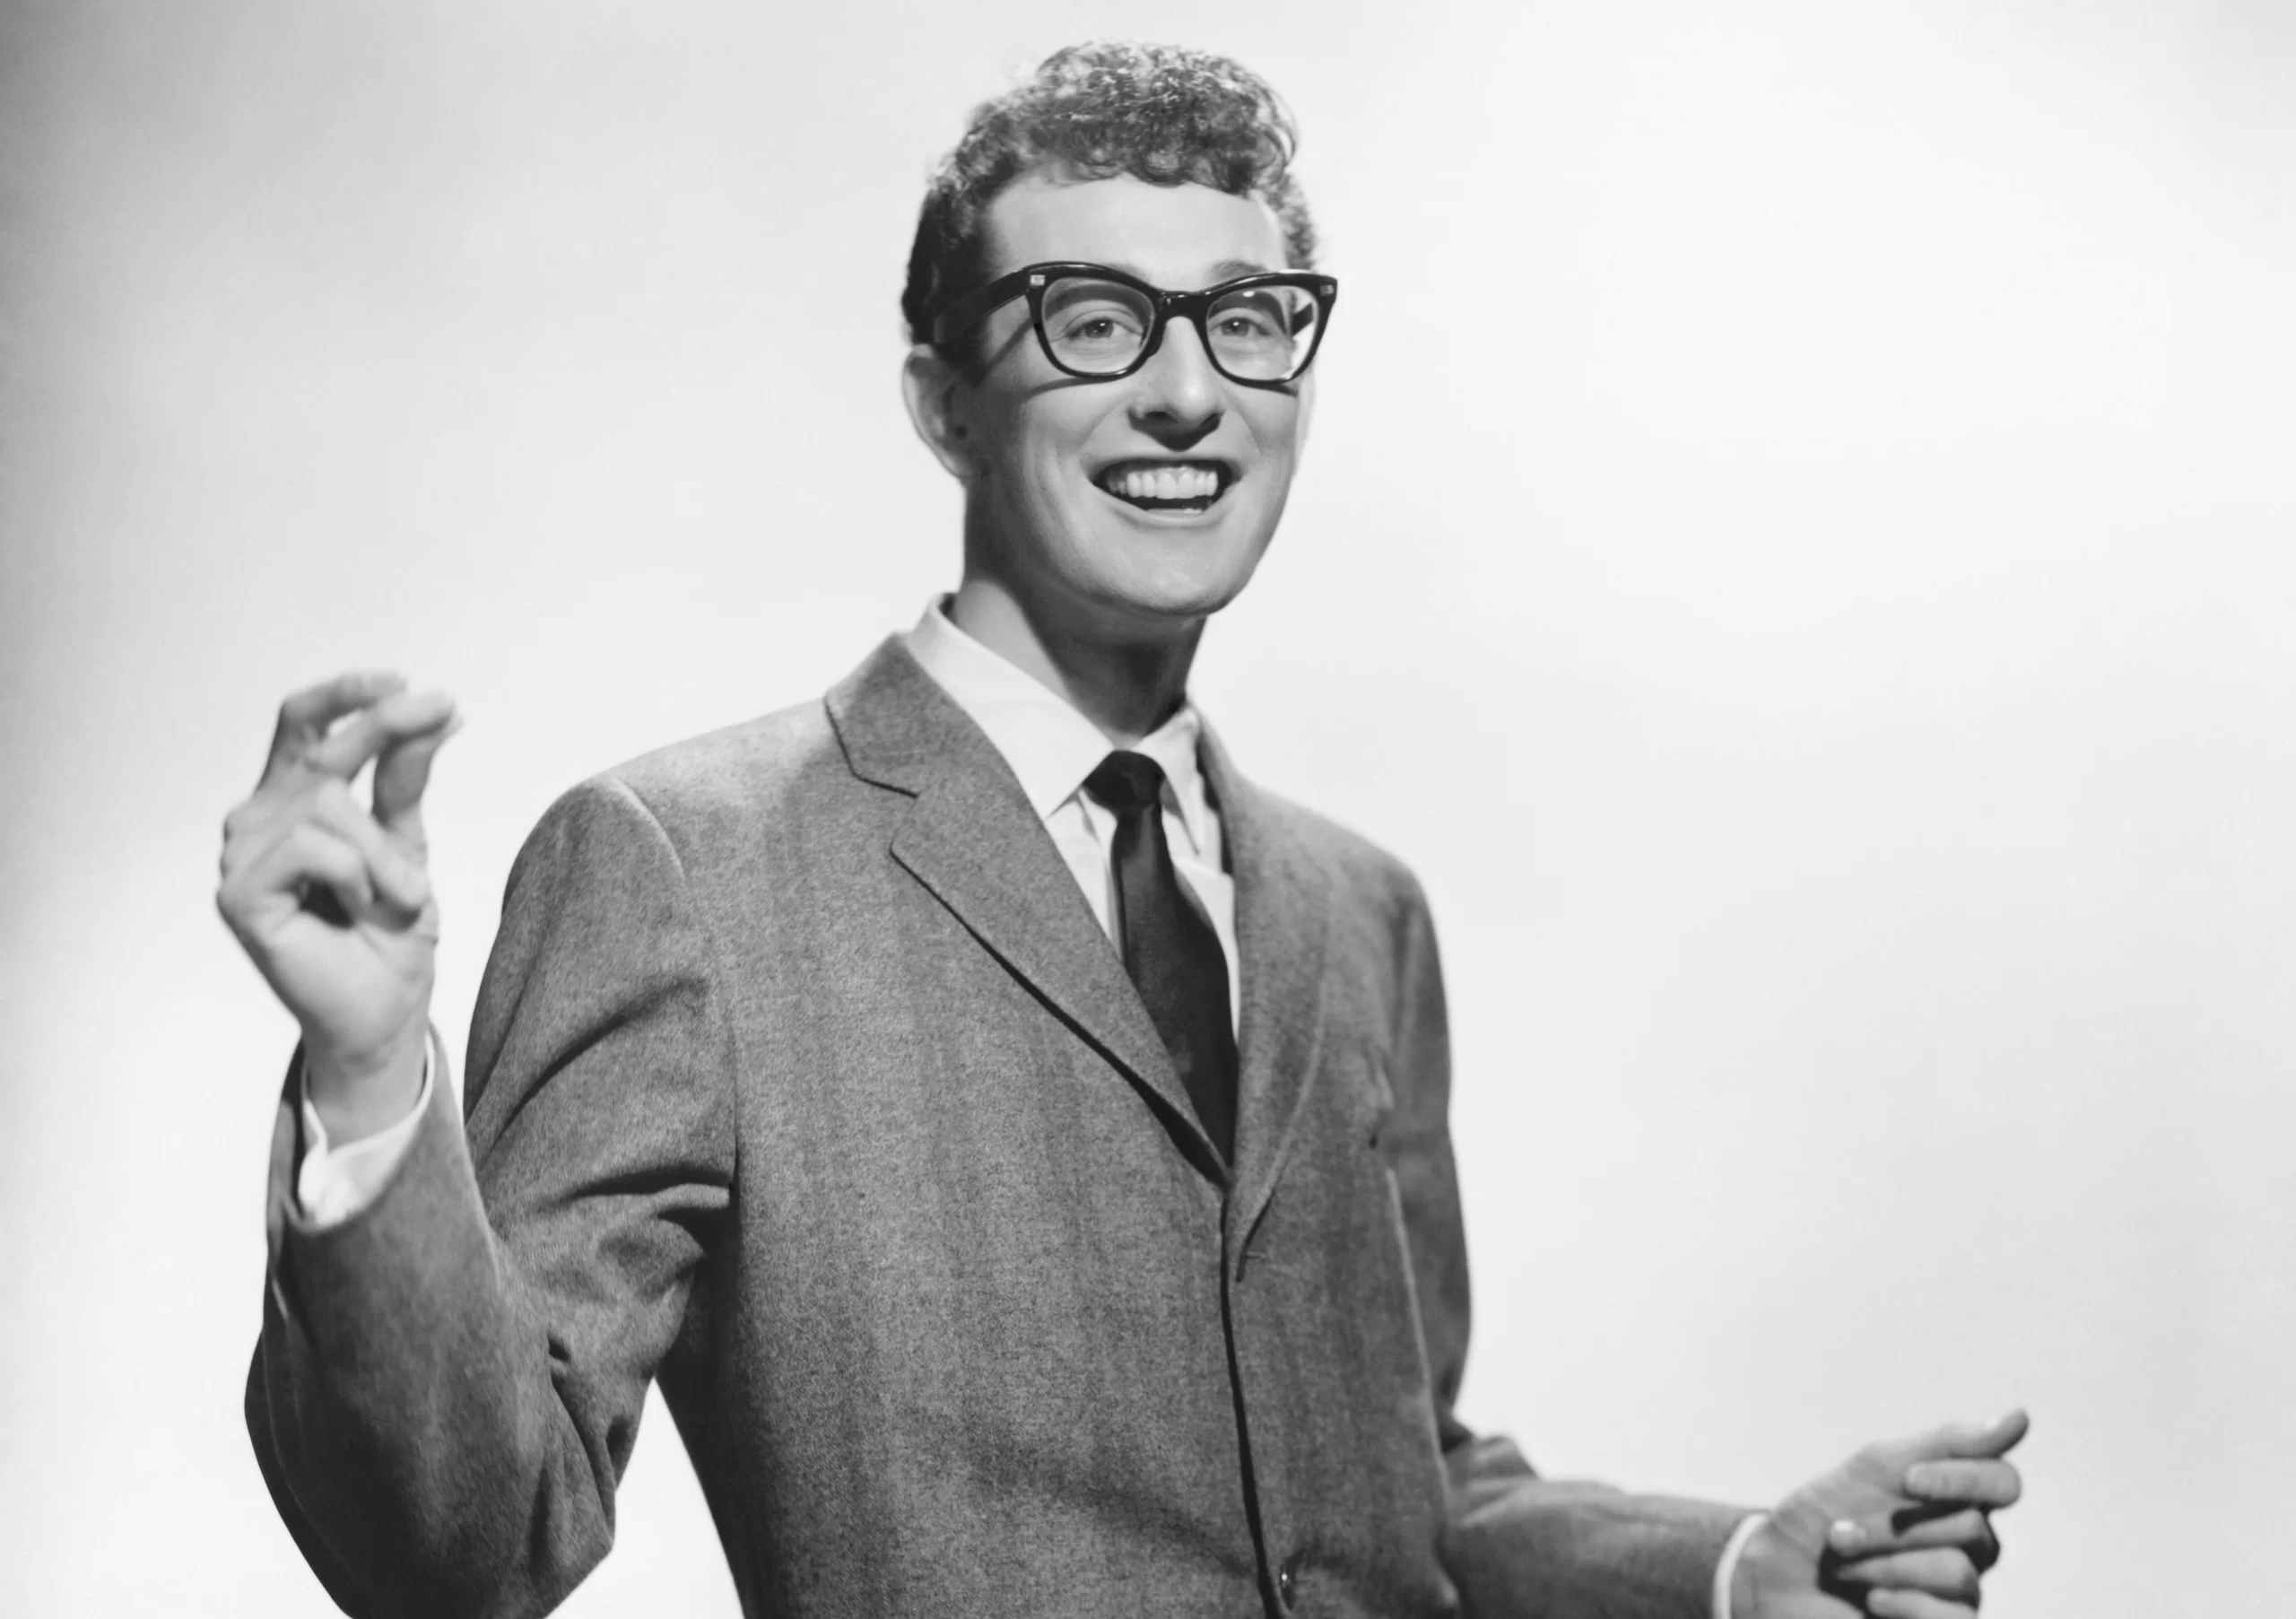 Buddy Holly Quotes on Life and Success